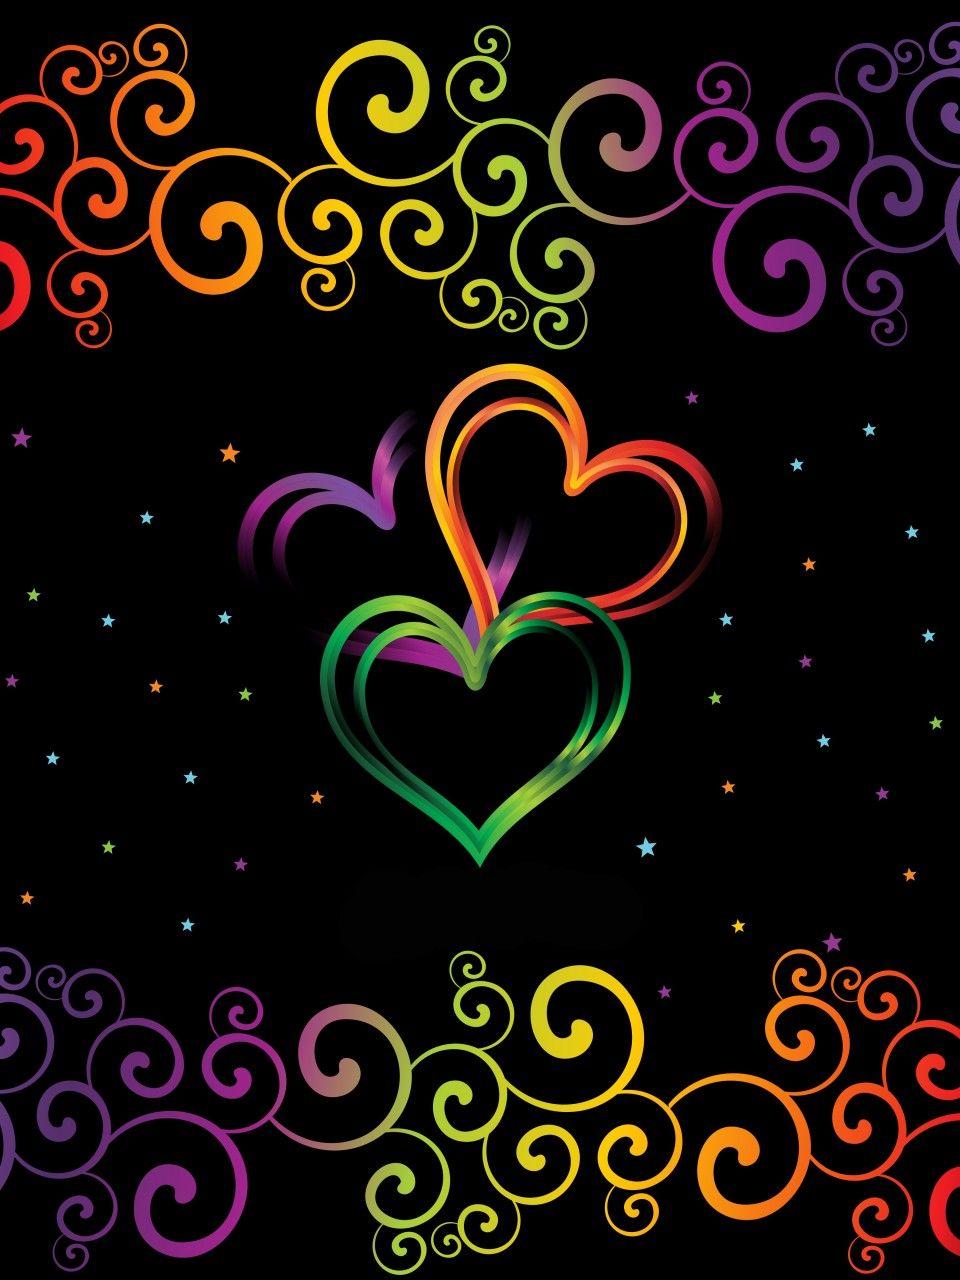 Colorful Hearts on Black Background. Amazing Photo, Wallpaper